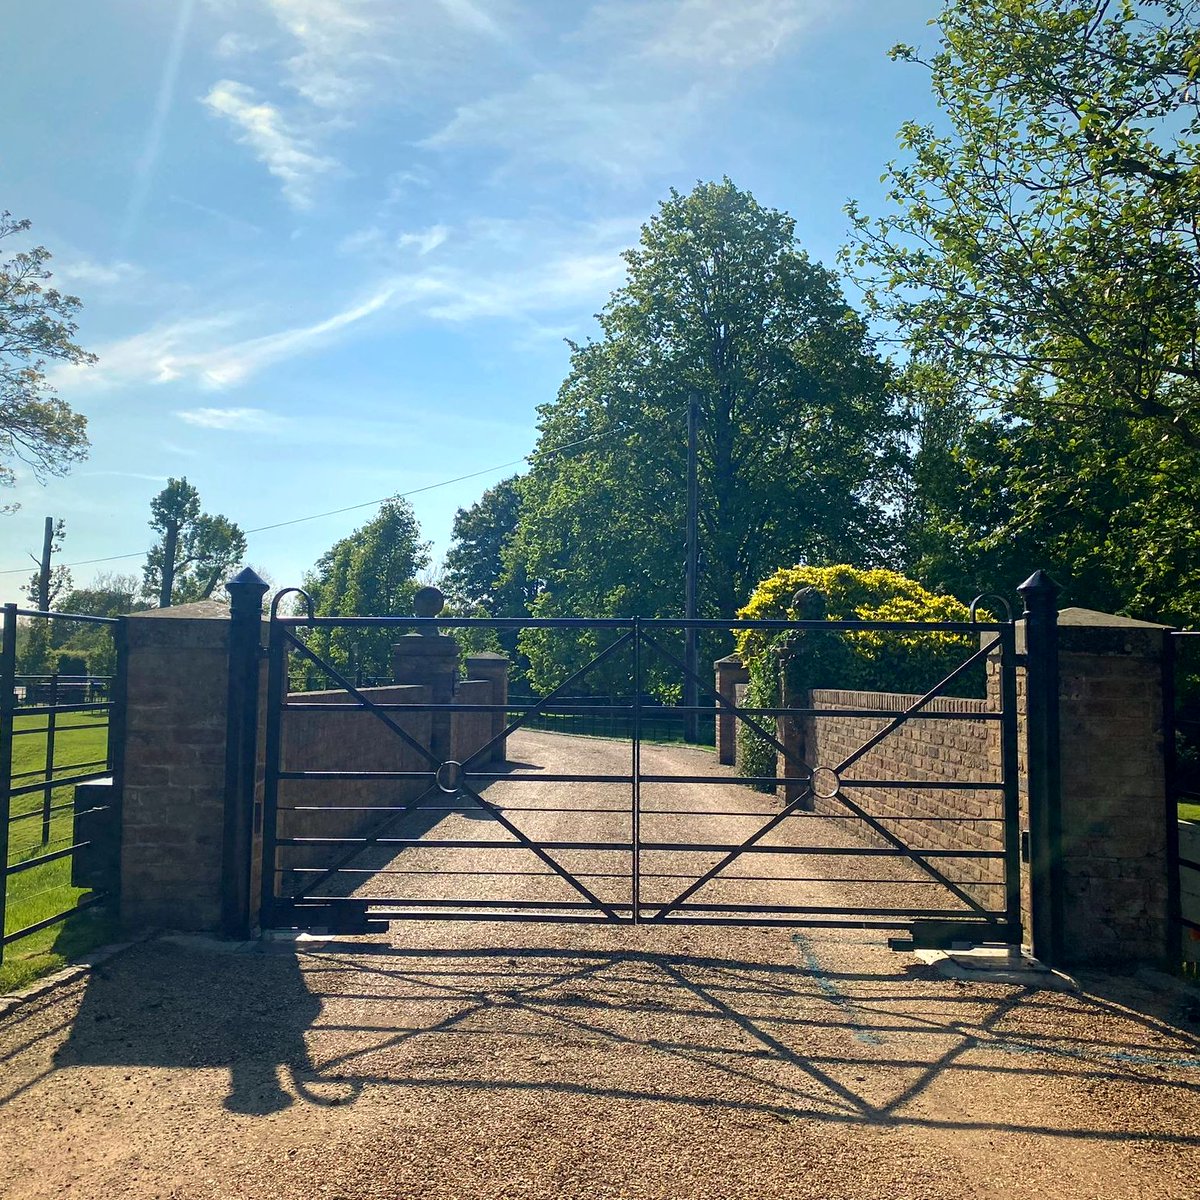 Our Entrance gates are made from solid steel and are built to last. All our gates can be automated as seen here. 
We have an in house design team so we can work together to produce the perfect entrance gate to your property
#entrancegate
#gate
#steelentrancegate
#thetraditionalco